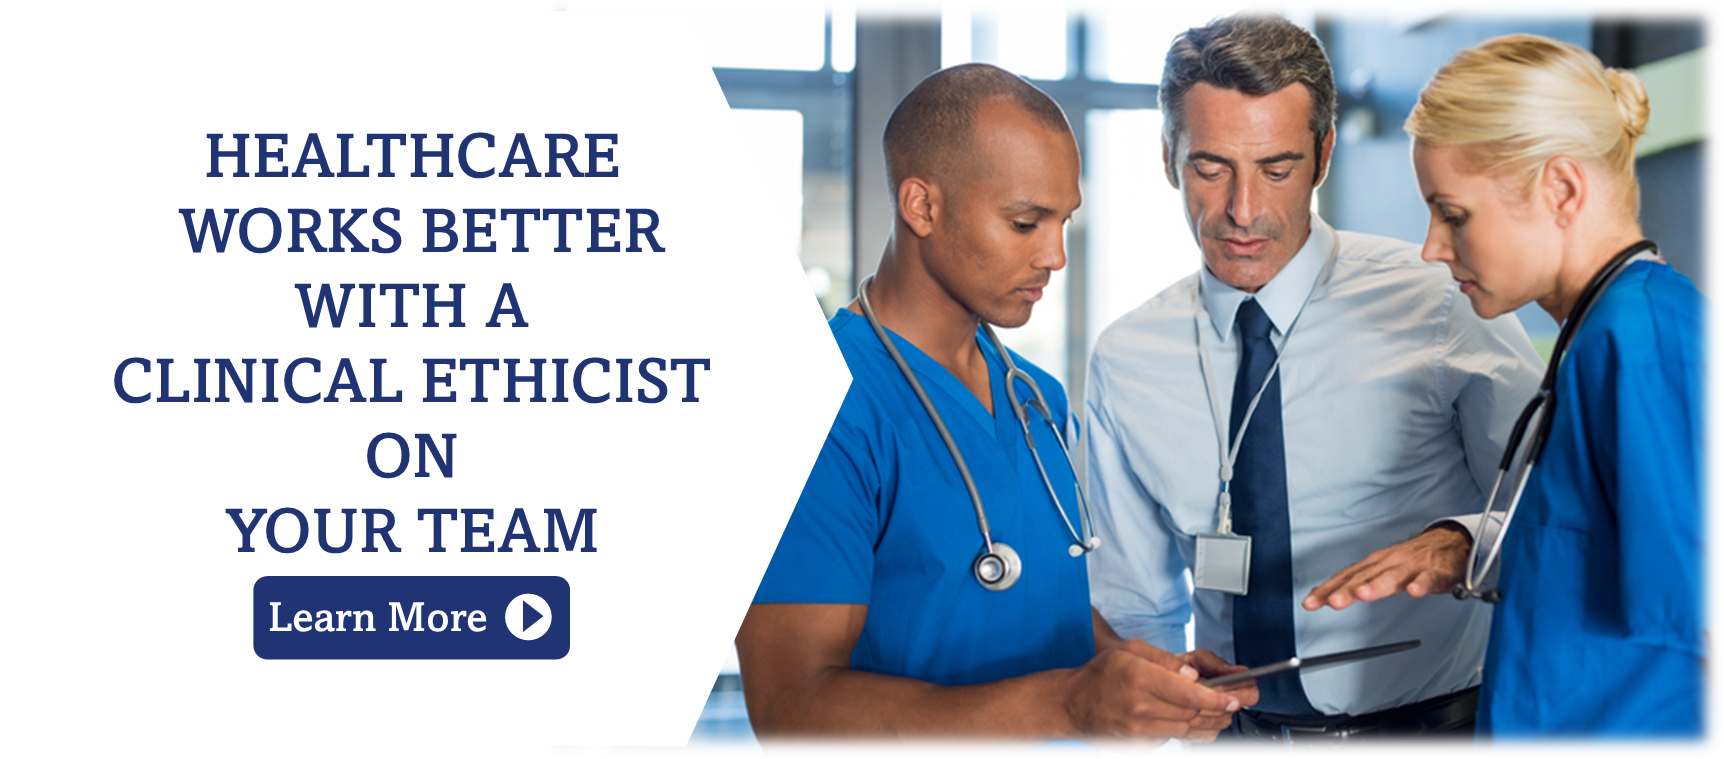 Size 431 x 189 Banner advertising ethics services, "Healthcare works better with a clinical ethicist on your team.